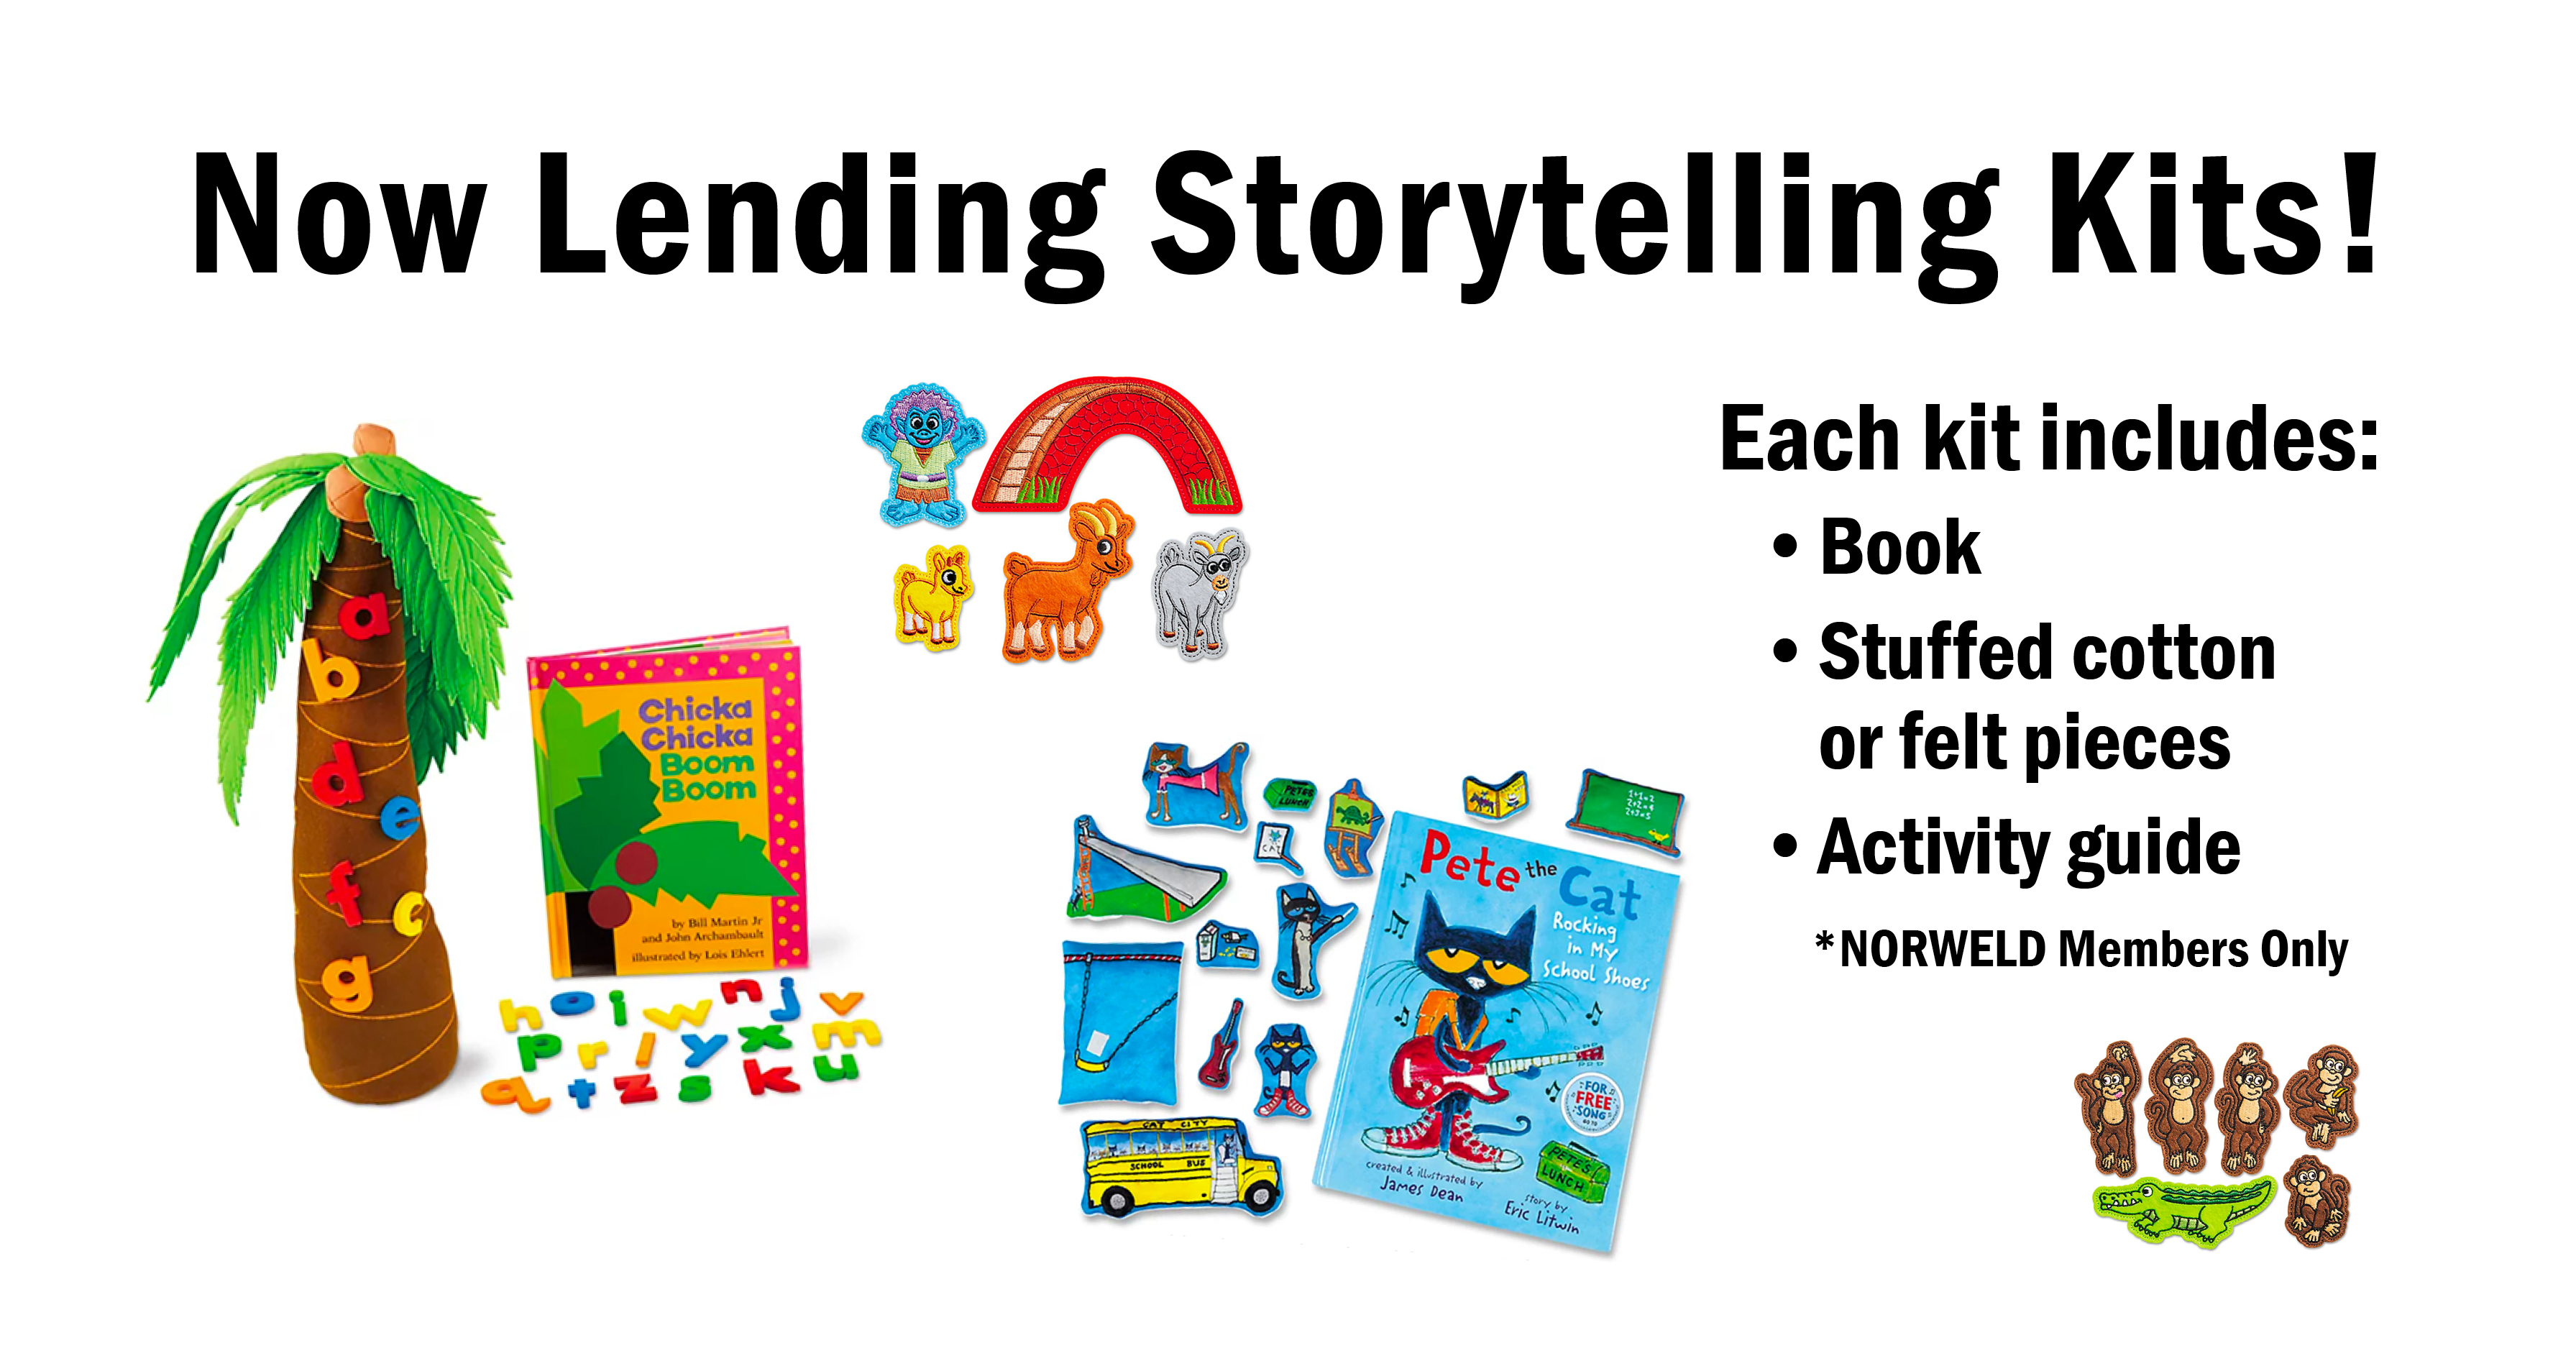 Now lending storytelling kits! Each kit includes a book, felt or stuffed cotton pieces, and an activity guide. Available to NORWELD members only.